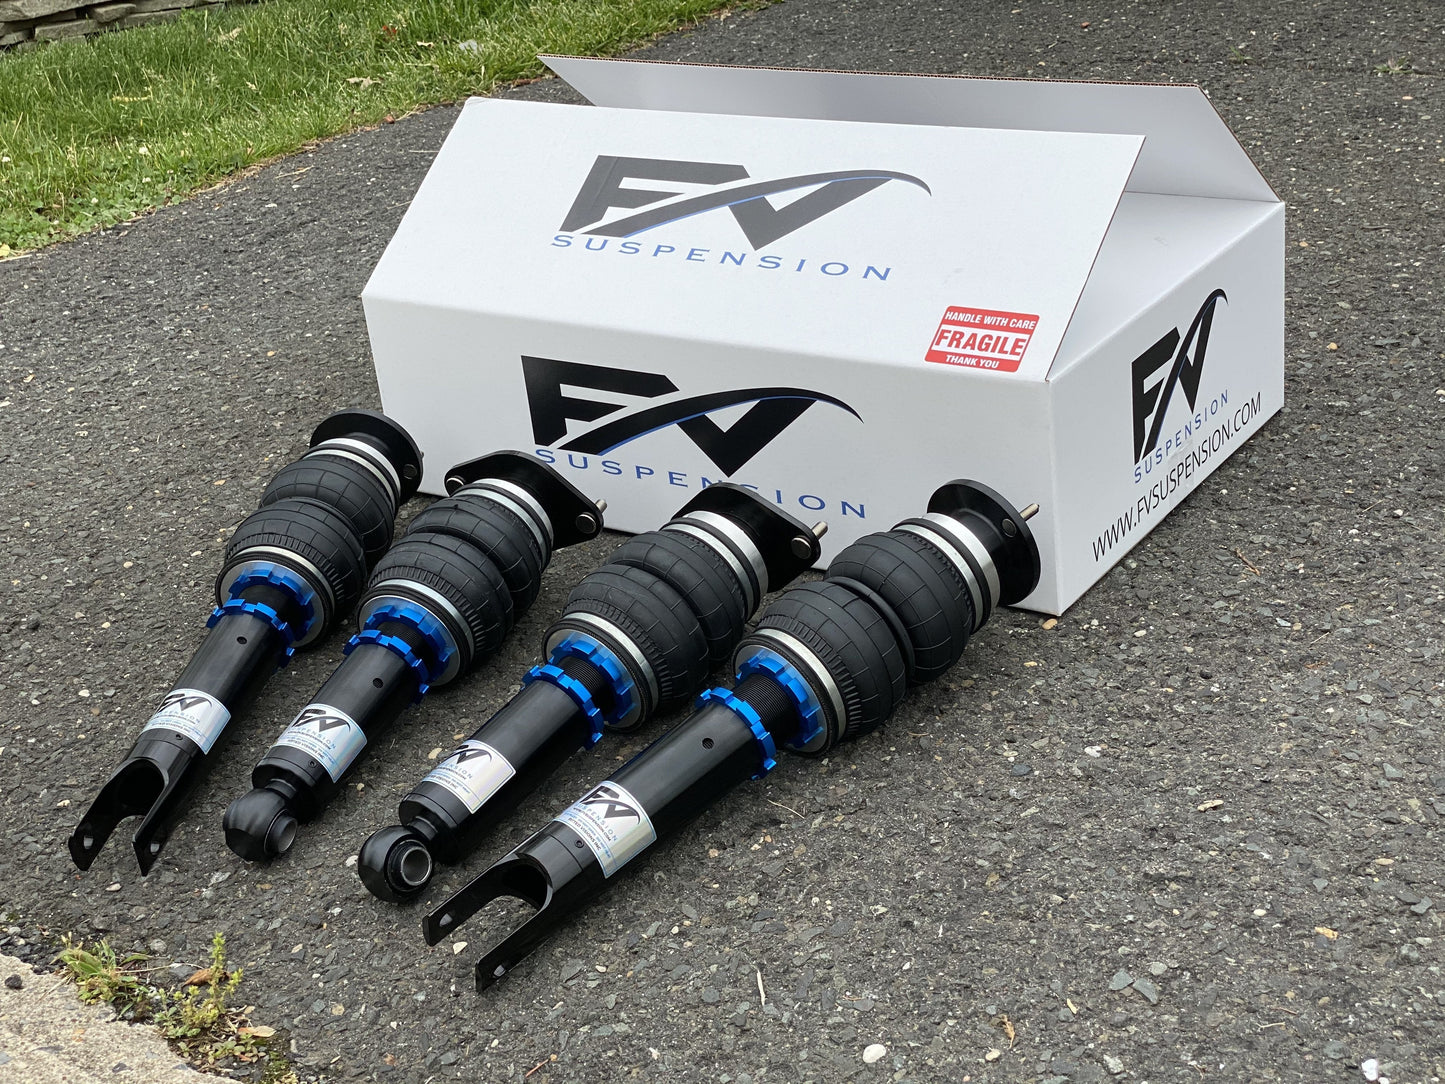 FV Suspension 3H Tier 3 Complete Air Ride kit for 09-15 BMW X1 E81 - Full Kit